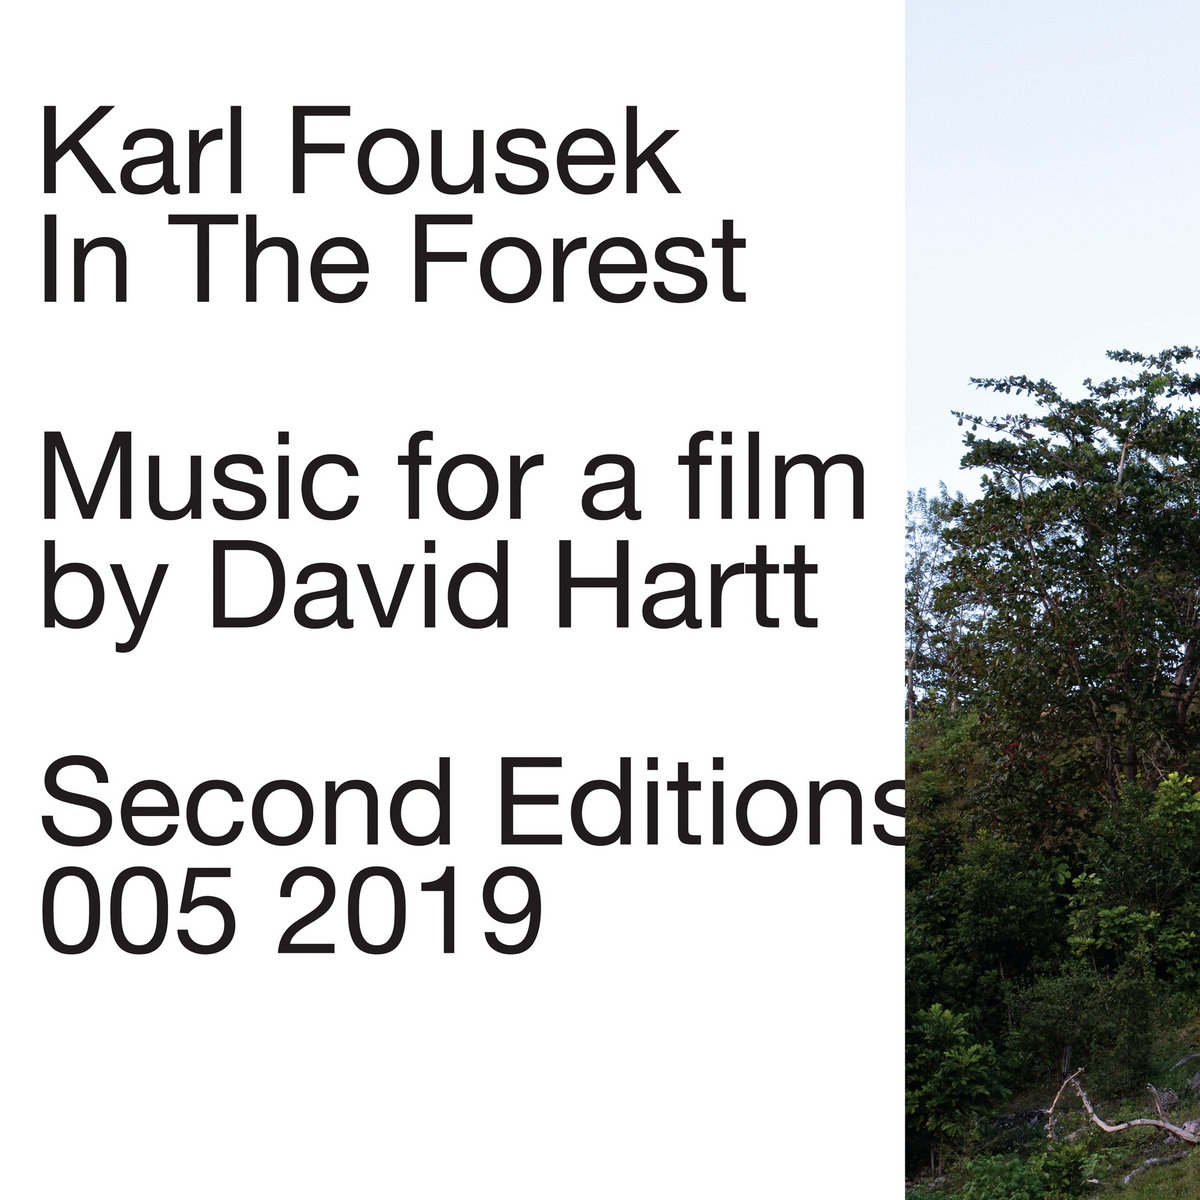 Karl Fousek - In the Forest